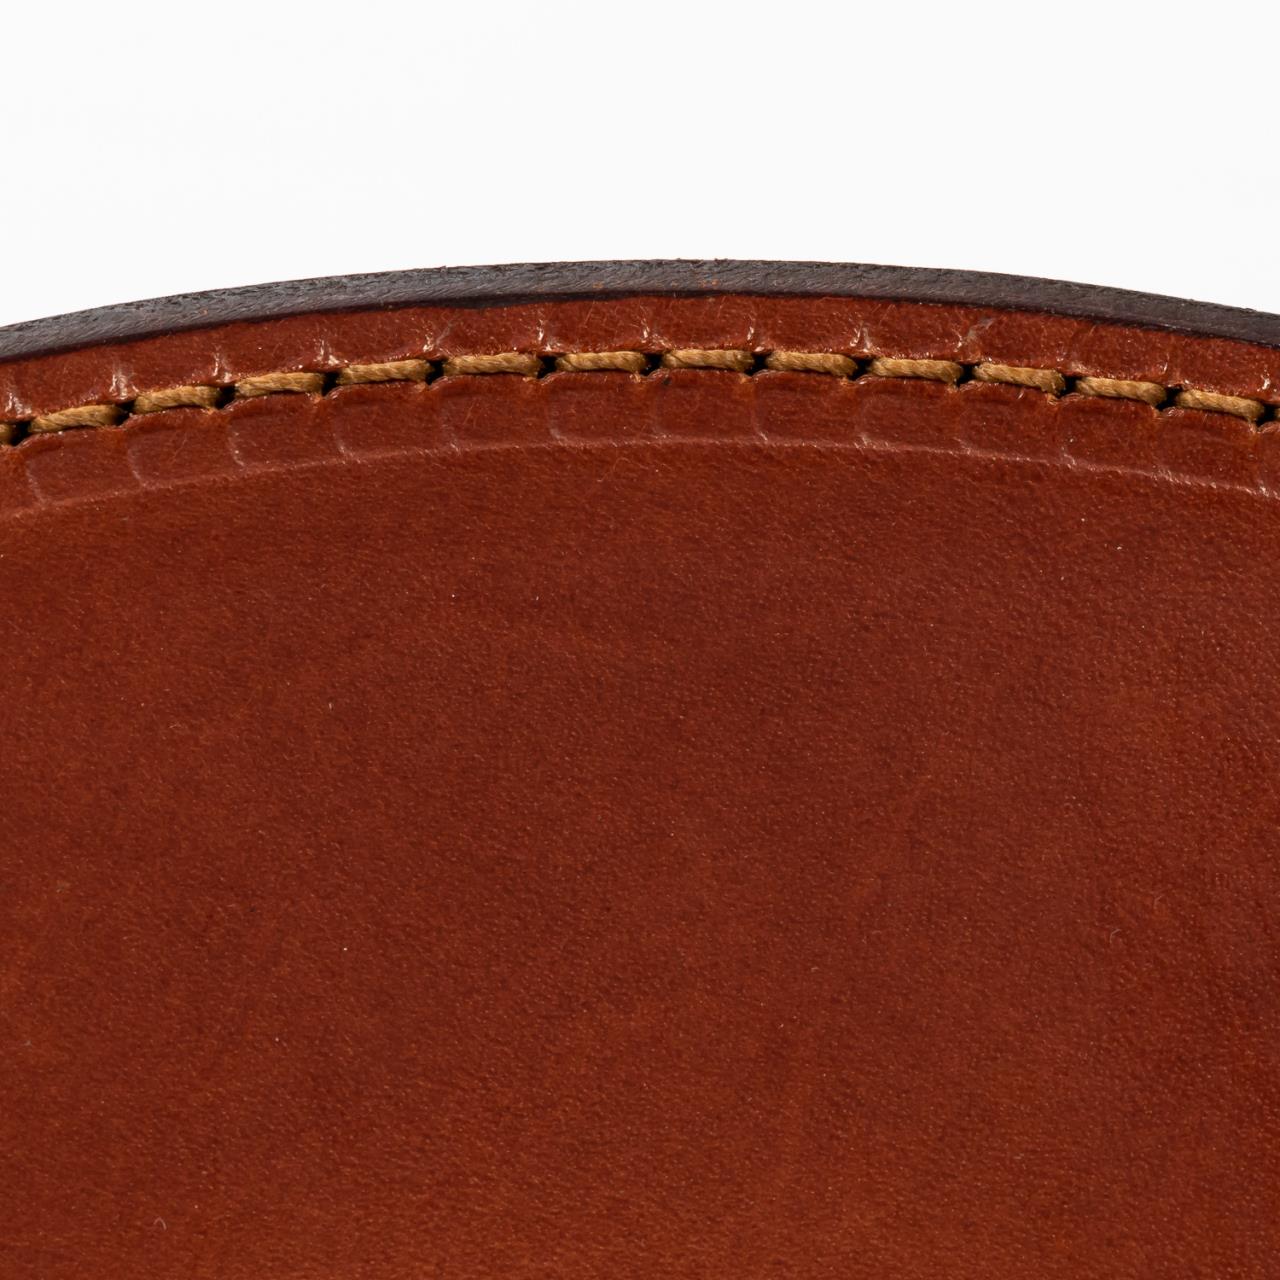 6 RALPH LAUREN "ROLLINS" BROWN LEATHER CHARGERS - Image 4 of 4